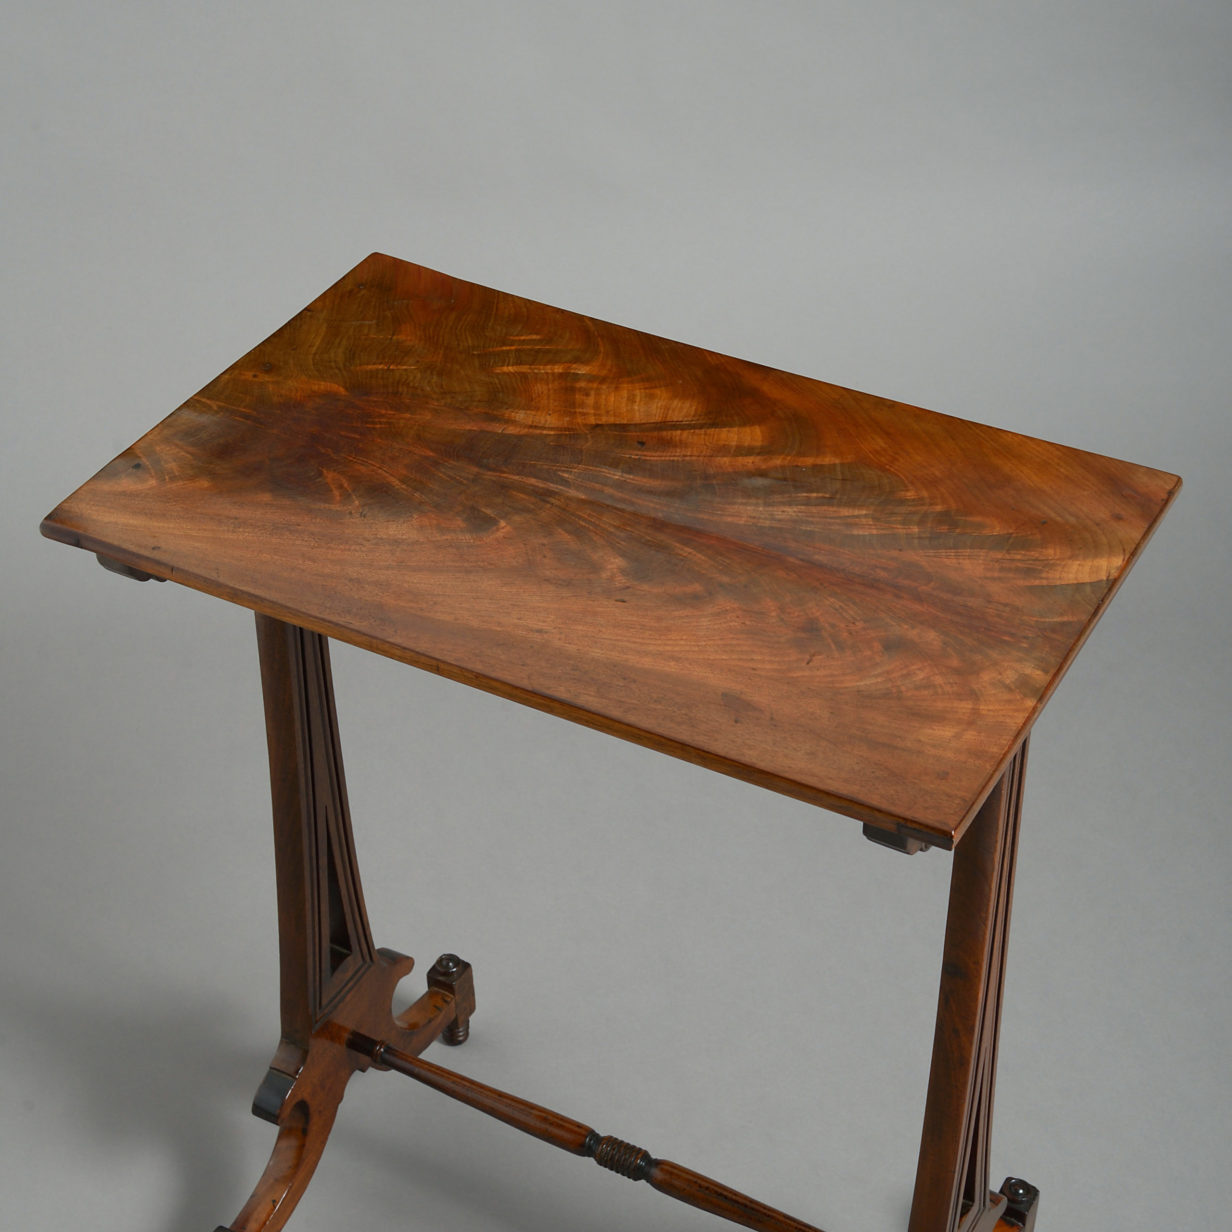 An early 19th century regency period mahogany end table